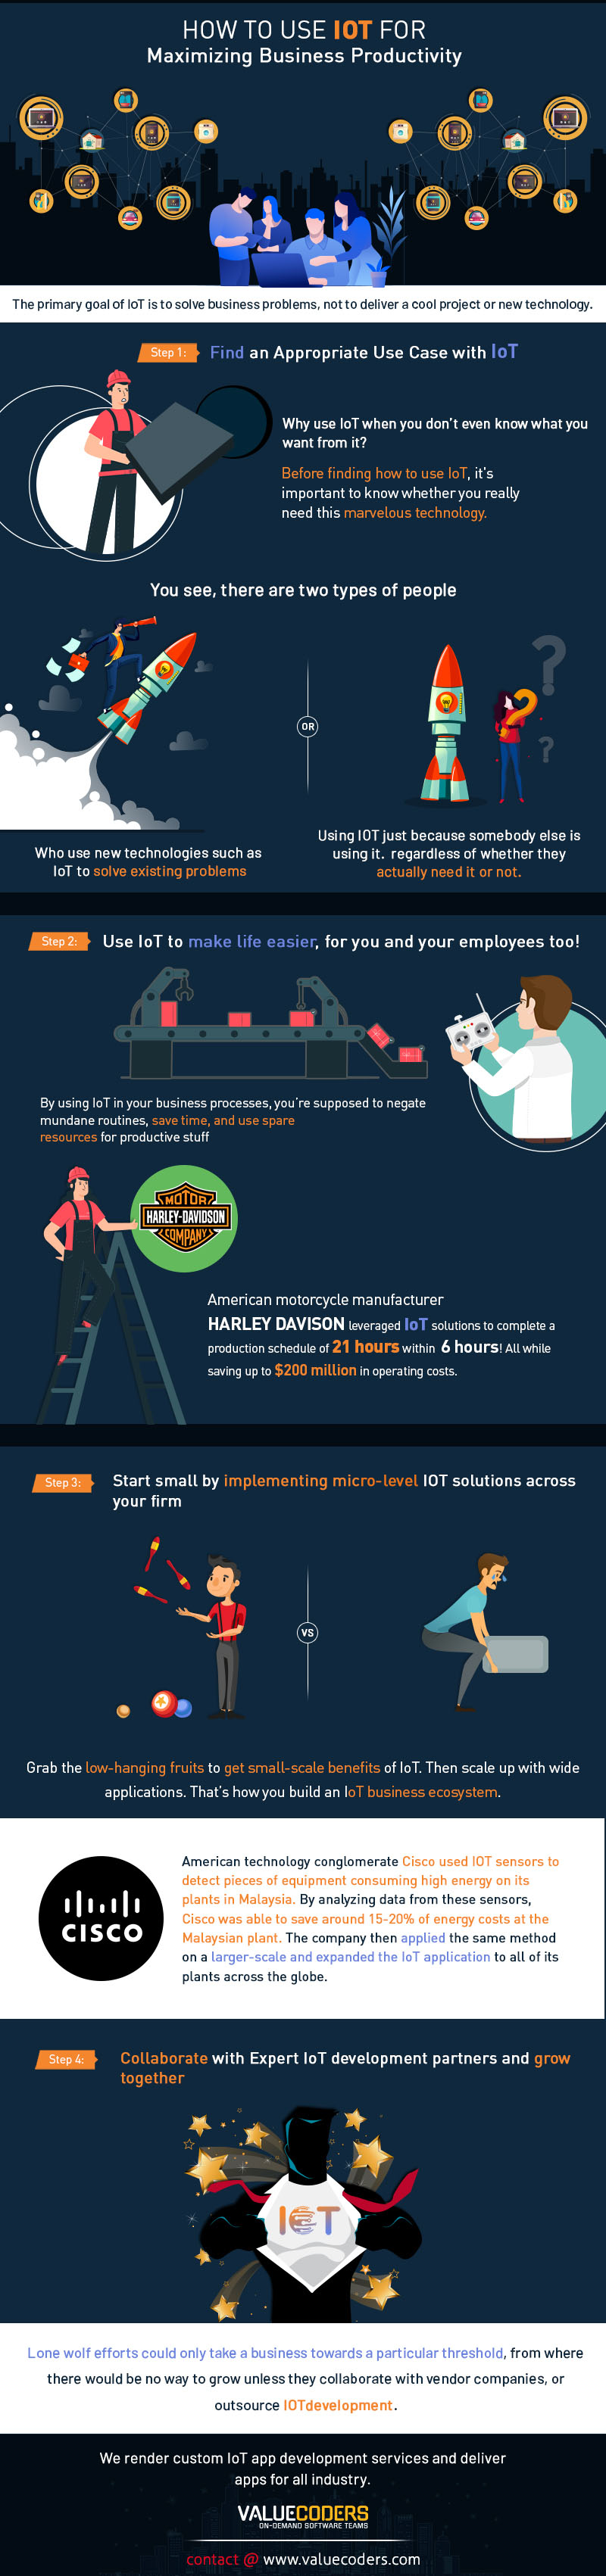 How To Build Profitable IoT Applications For Your Business [Infographic]